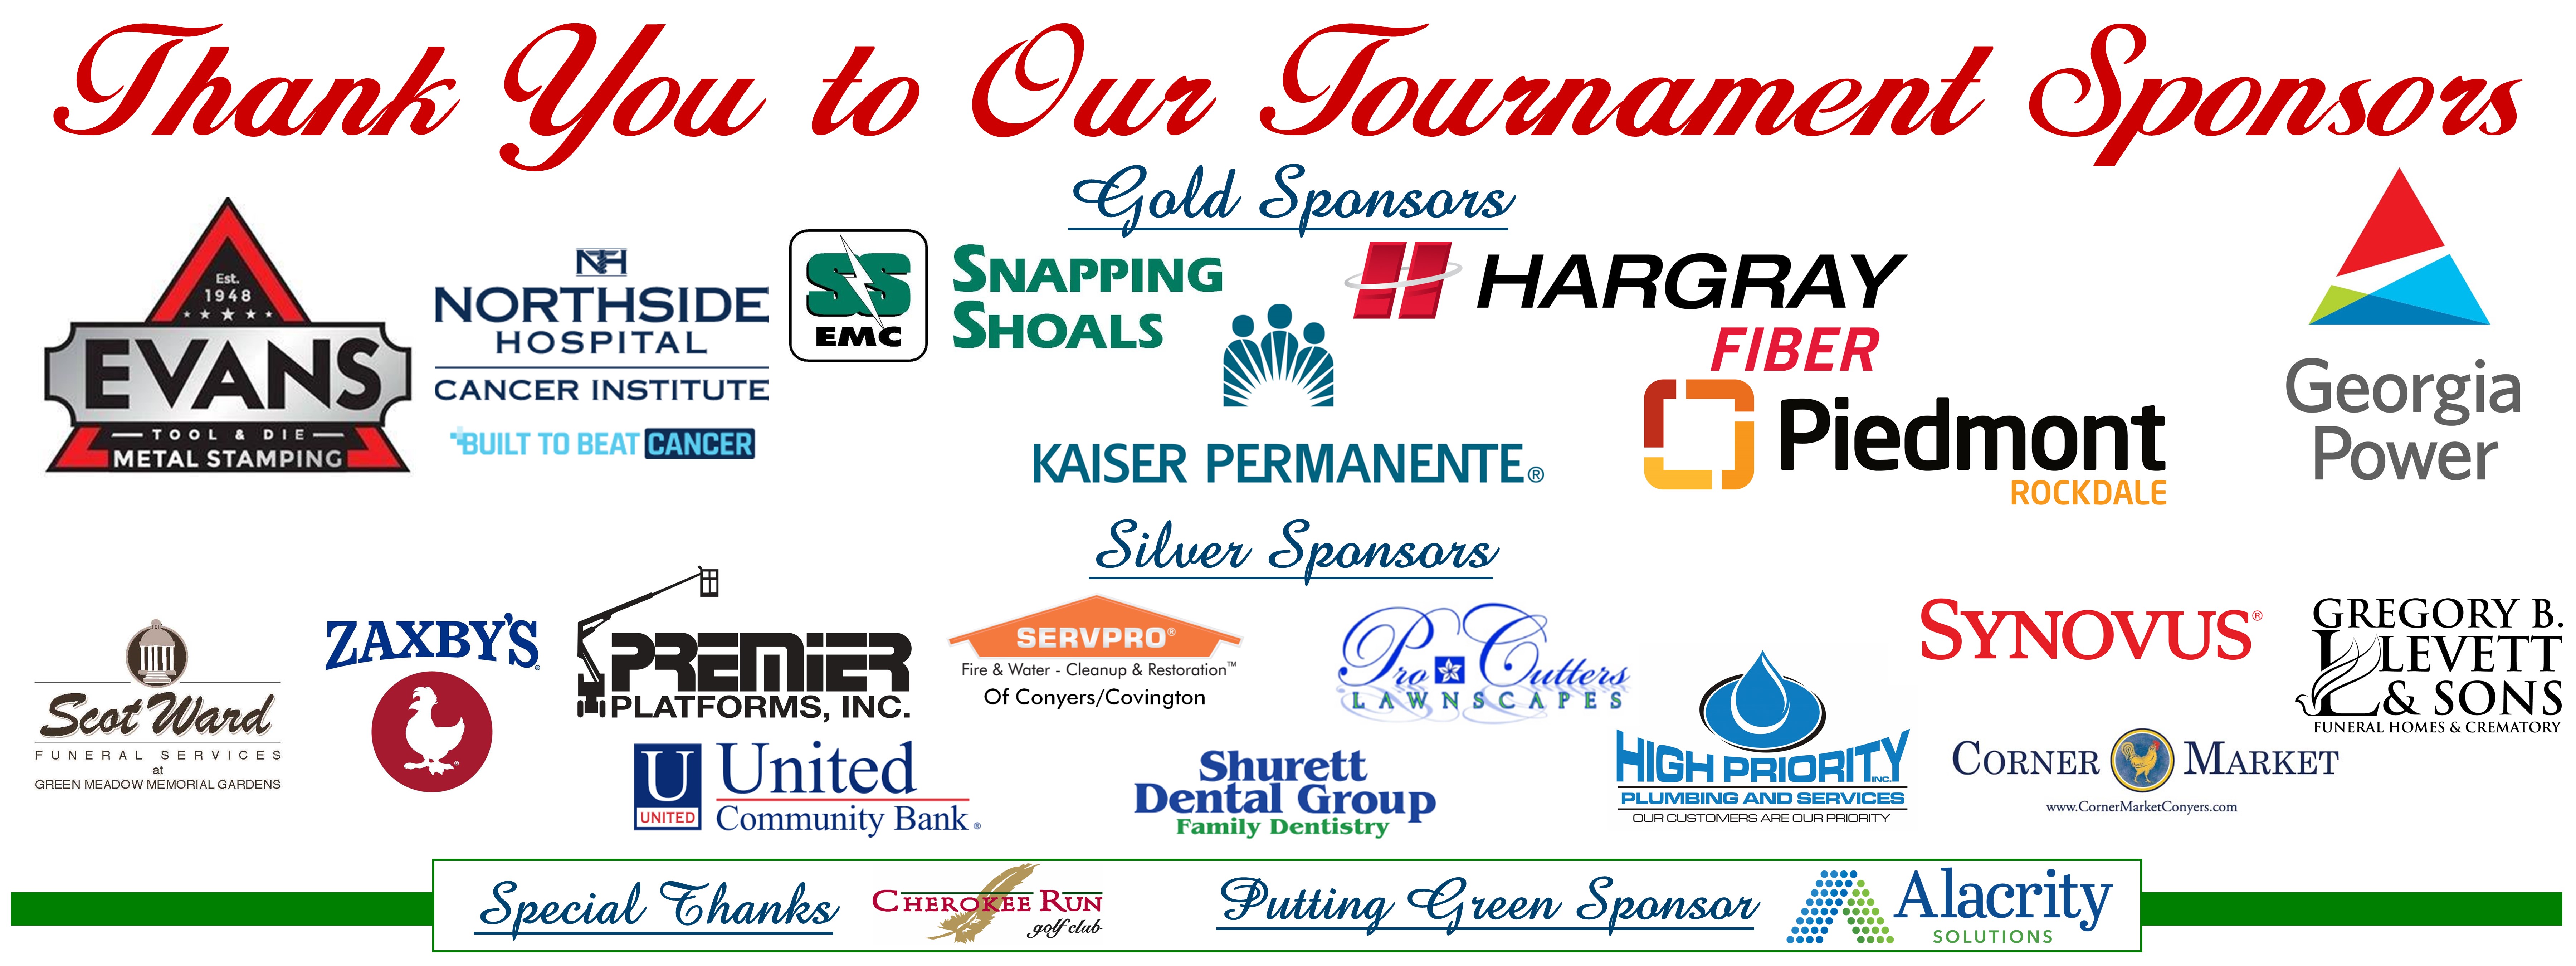 2021 Thank You to Our Tournament Sponsors